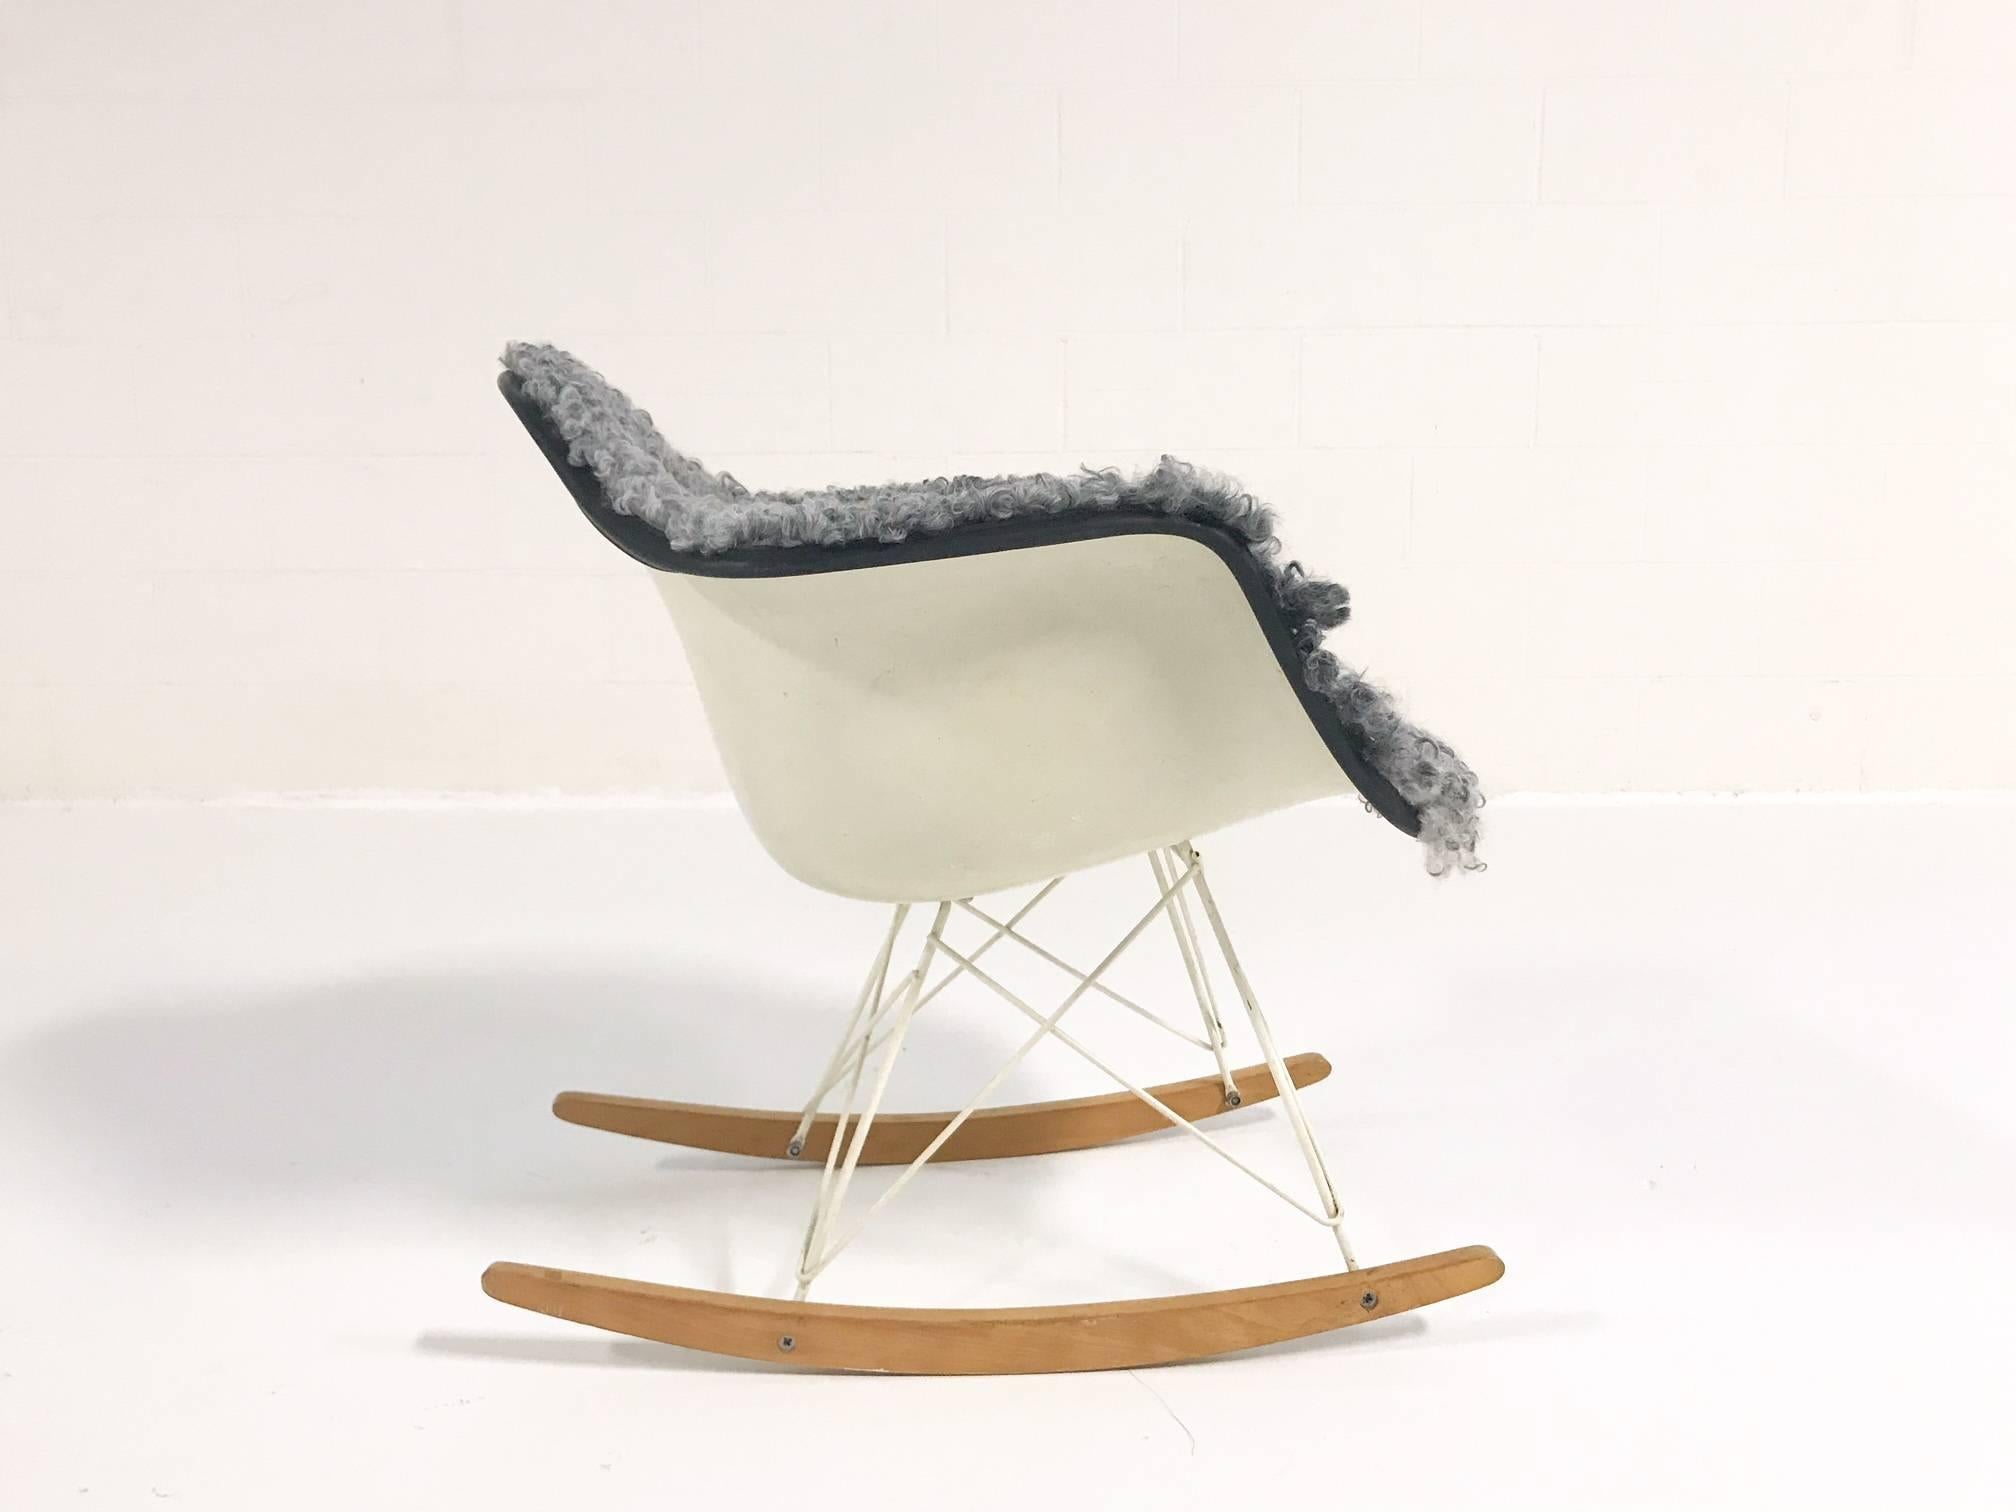 The classic Eames Rocker! A cult-favourite design gets an added oomph, restored in our cozy, soft, classicly-hued Gotland sheepskin. What a beautiful piece!

Herman Miller
USA, 1950-1969.
Molded fiberglass, enameled steel, birch, rubber, and